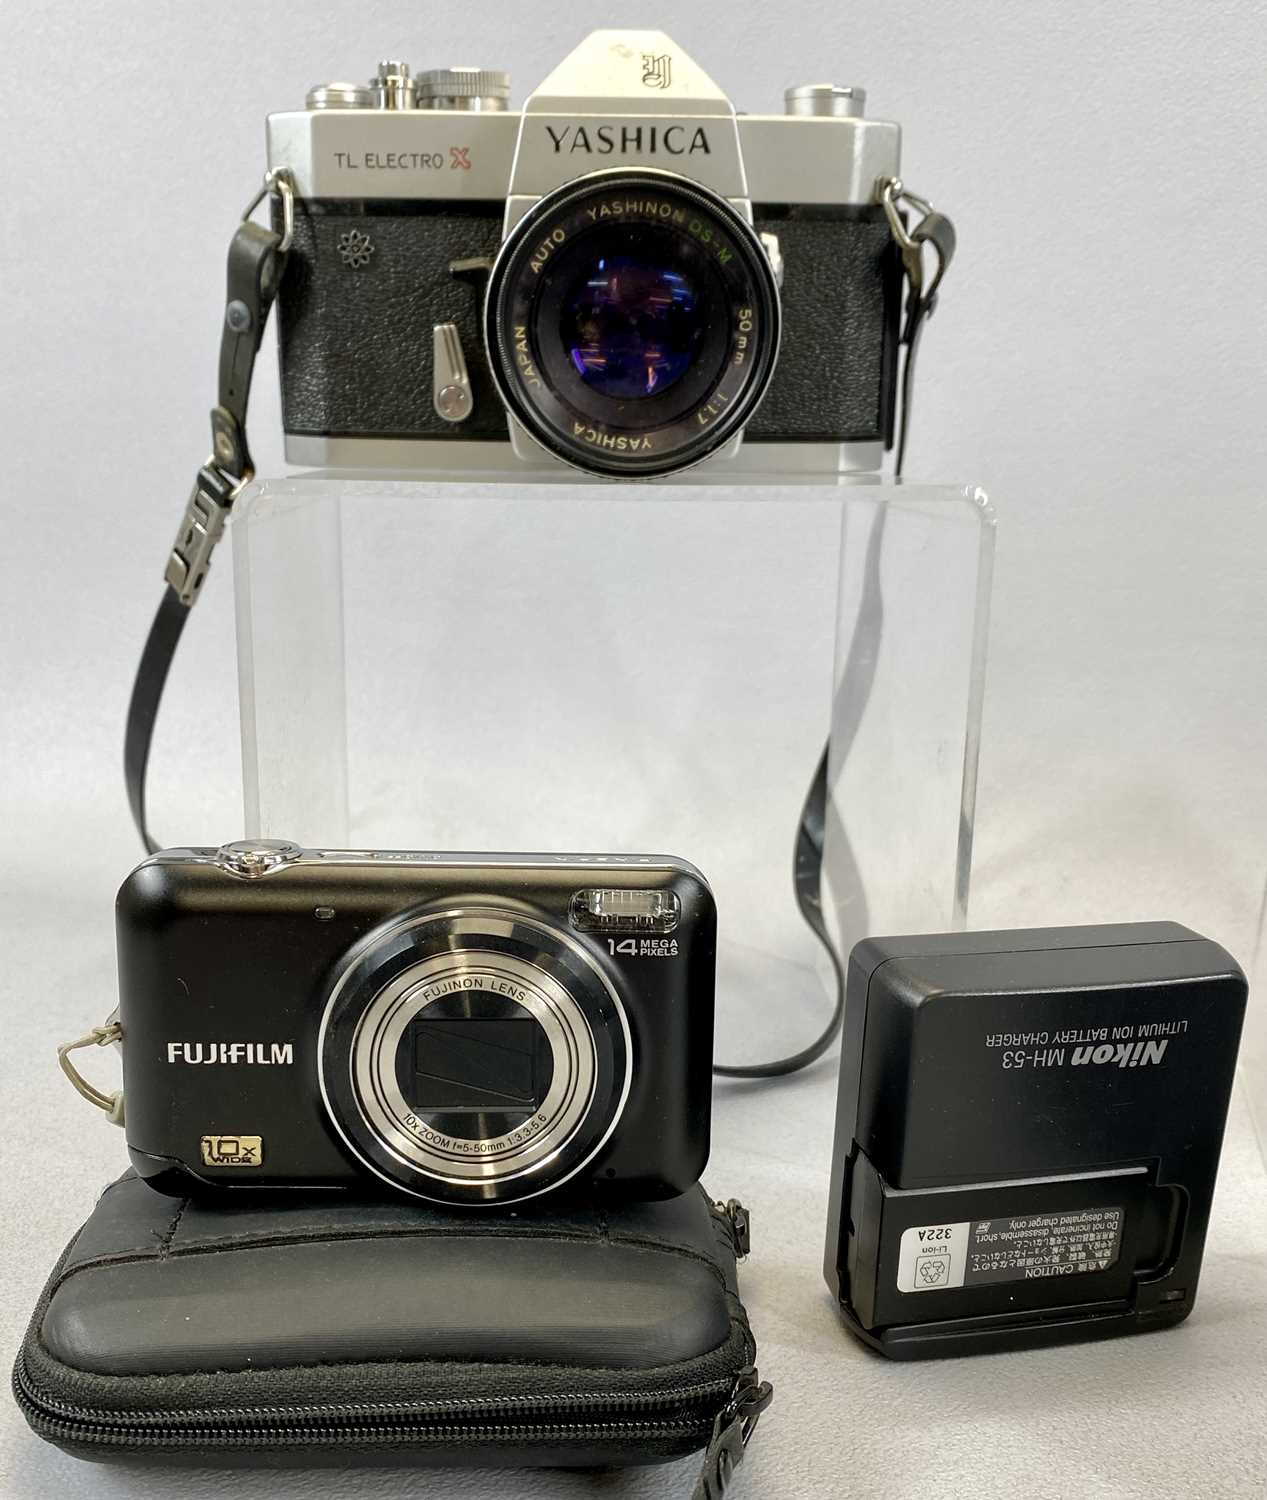 CAMERAS & ACCESSORIES including Olympus OM-1 SLR with 50mm lens, Yashica TL Electro SLR camera - Image 2 of 4